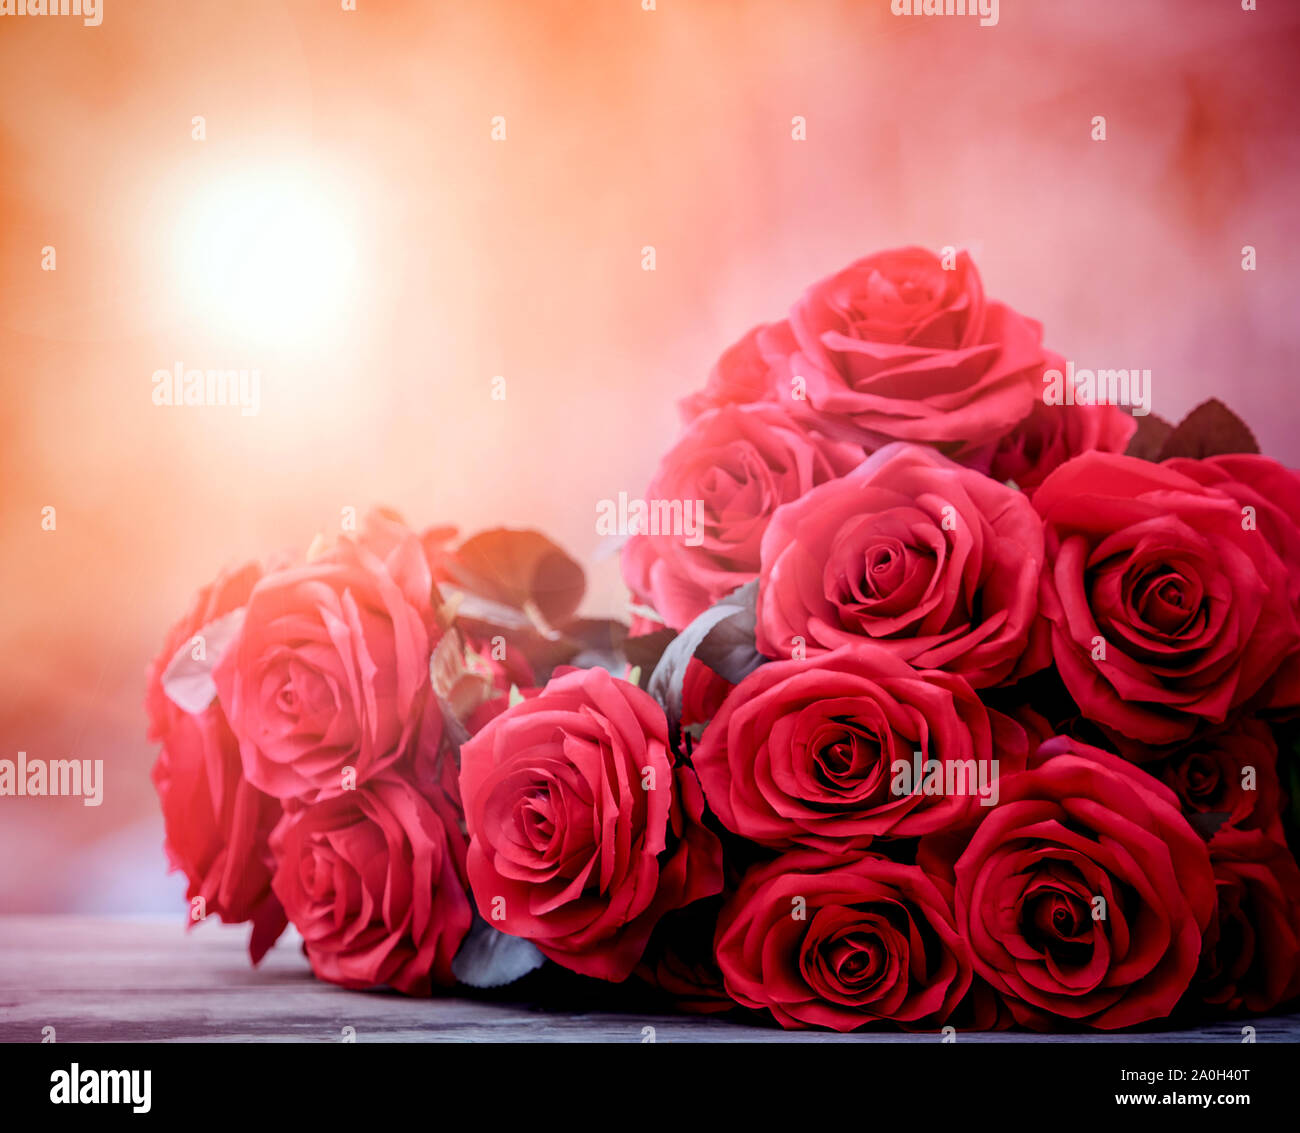 close up beautiful red roses bouguet with glowing light background ...